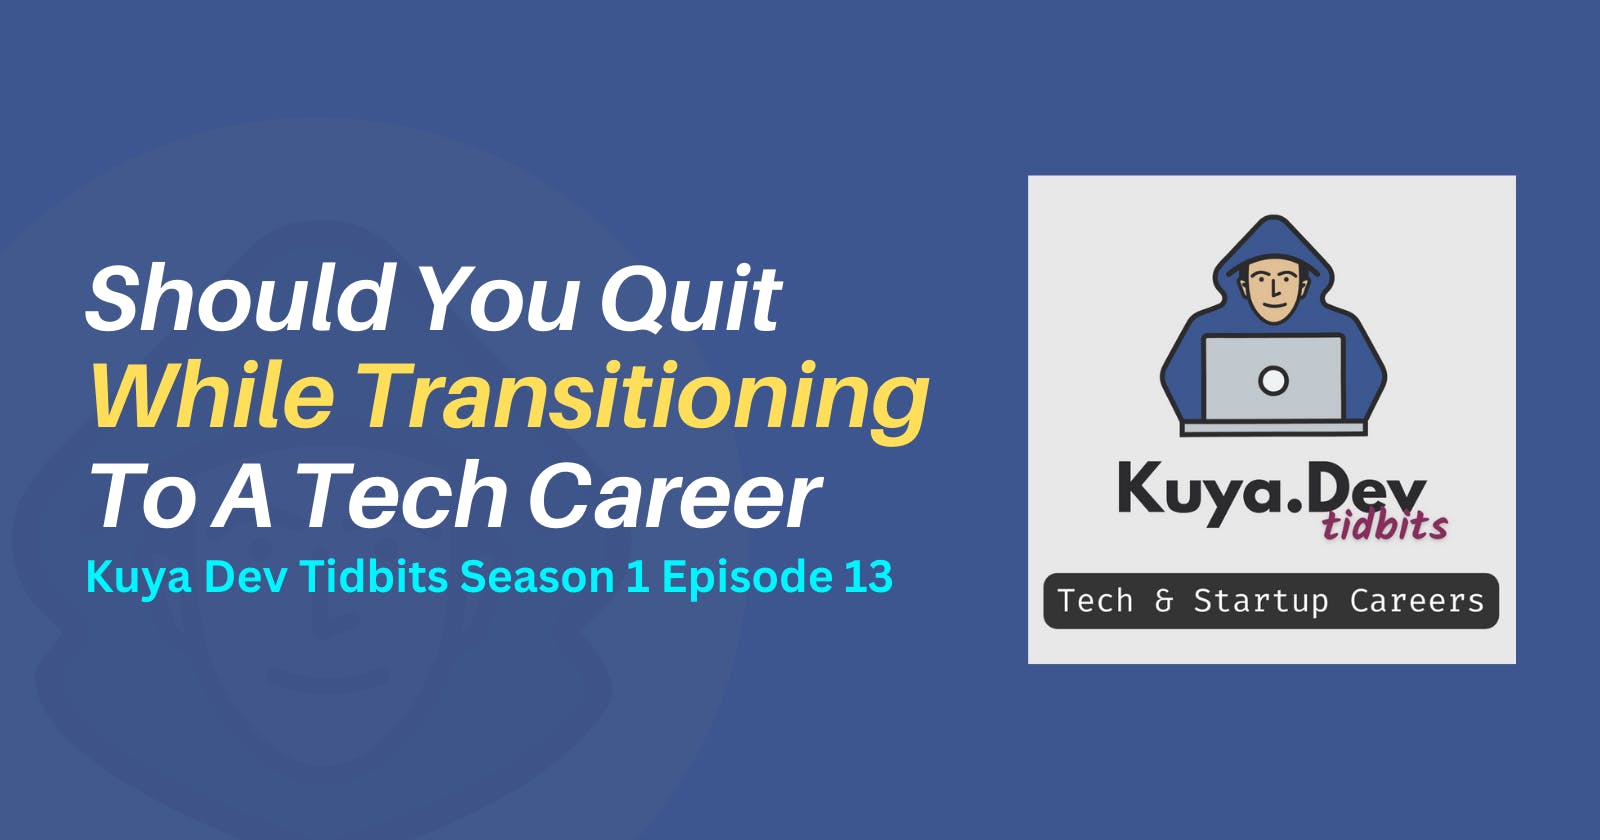 Should You Quit Your Current Job While Transitioning to a Tech Career?